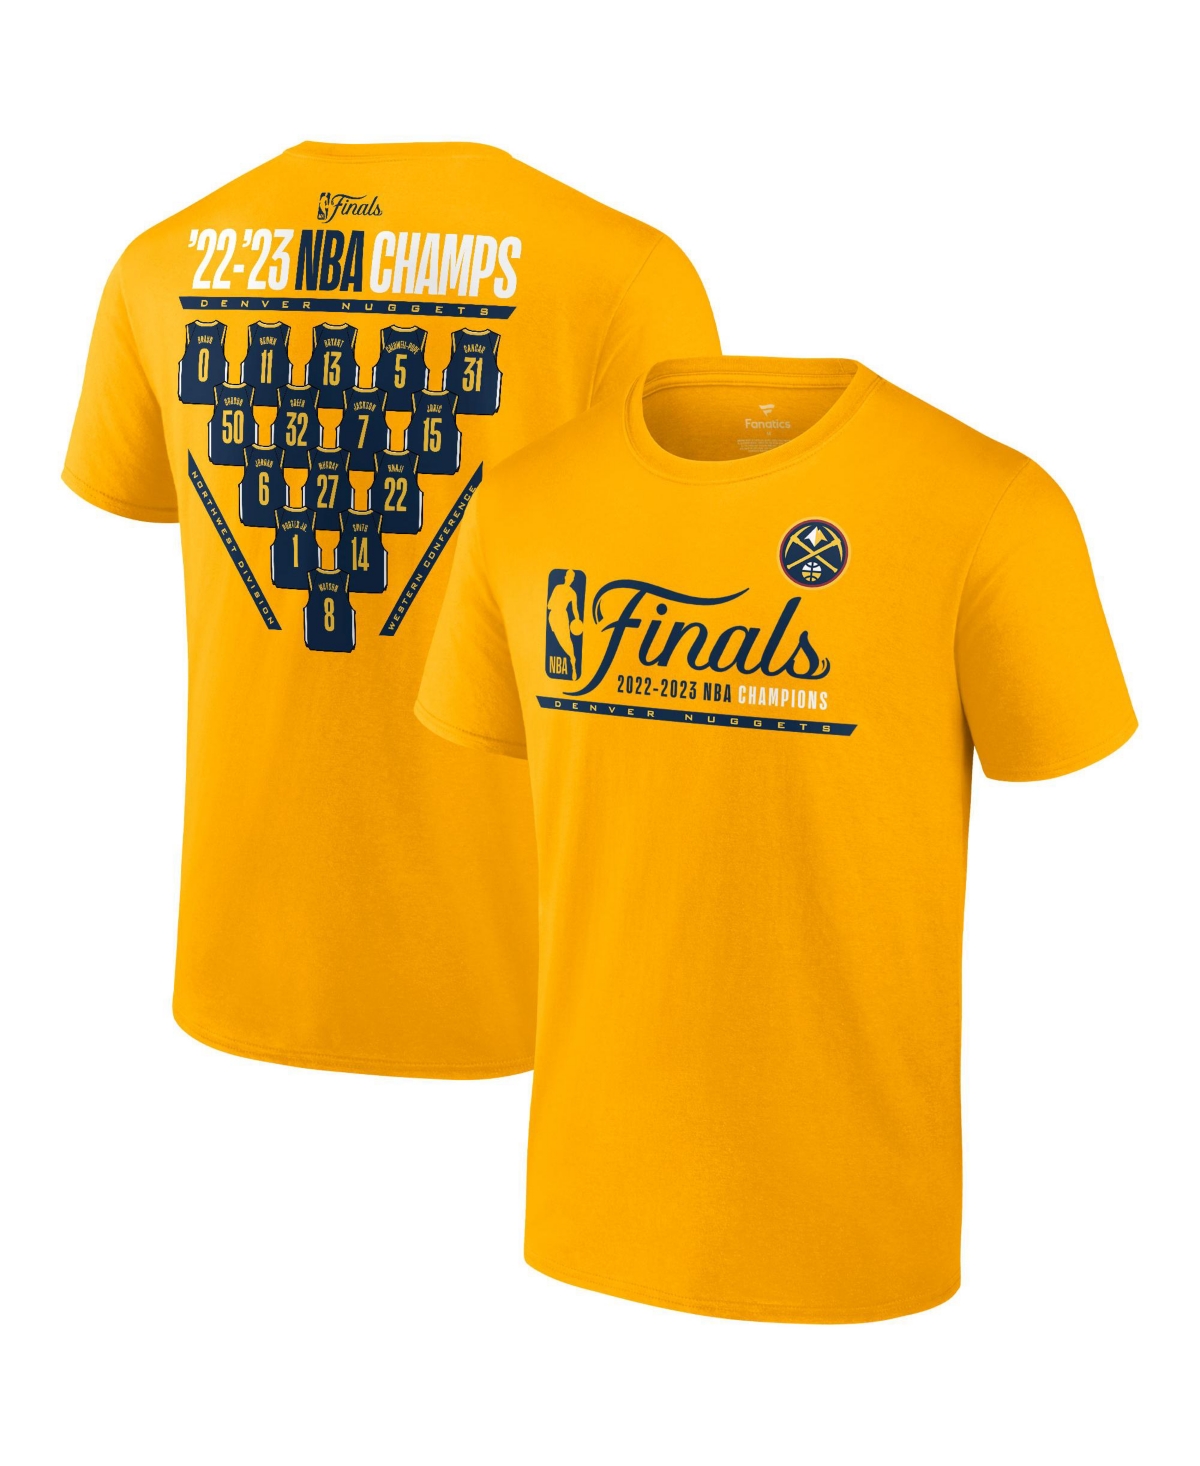 NBA Finals 2023 Denver Nuggets Shirt - Bring Your Ideas, Thoughts And  Imaginations Into Reality Today